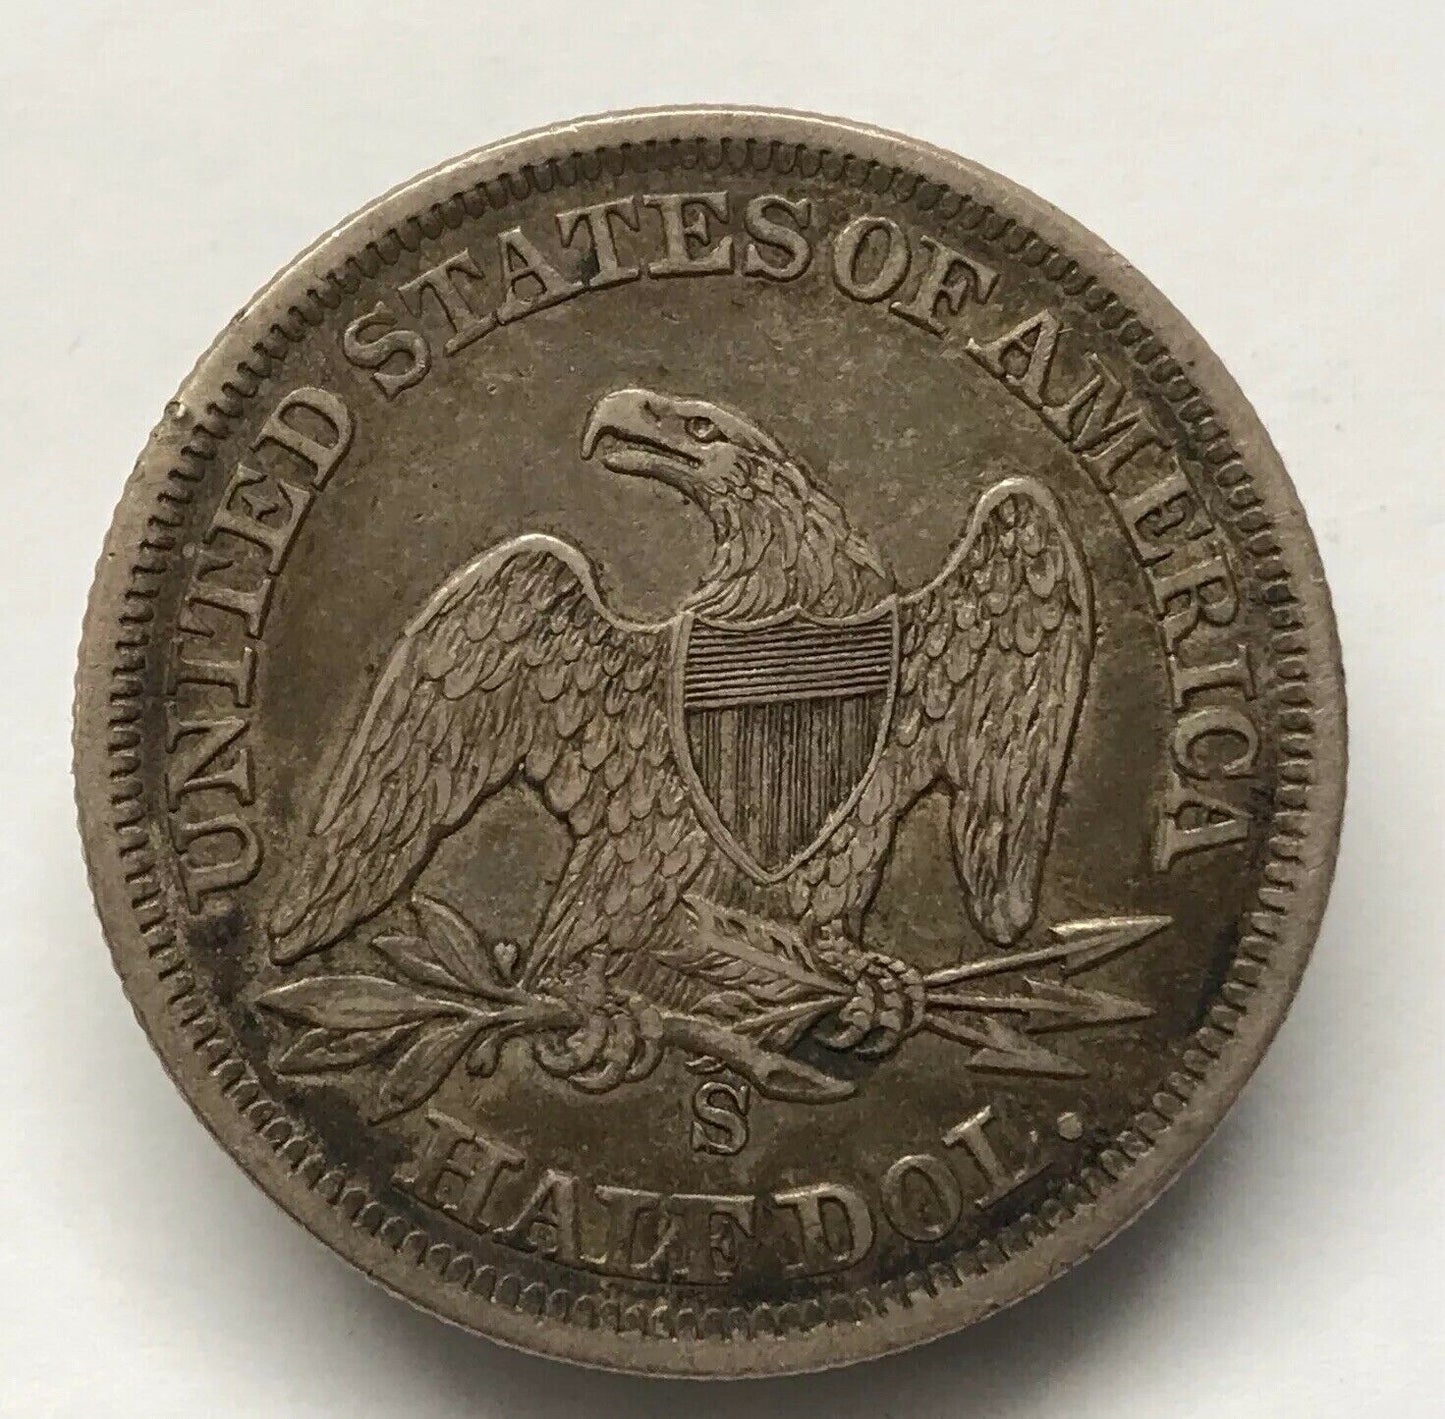 1858S Seated Liberty Half Dollar XF 45 | Of Coins & Crystals